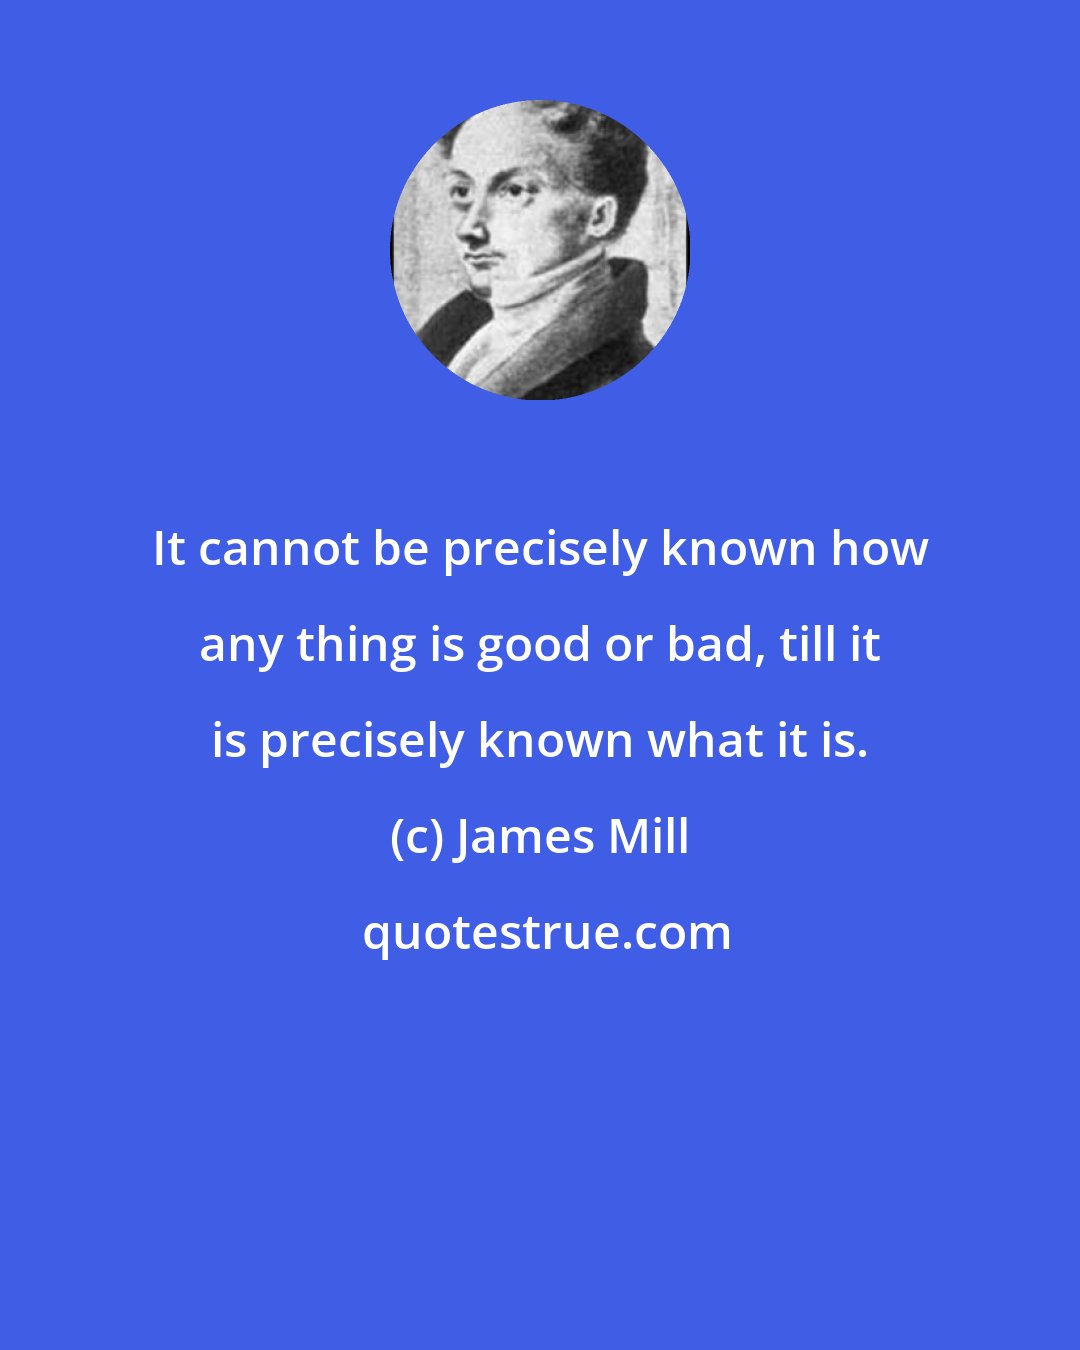 James Mill: It cannot be precisely known how any thing is good or bad, till it is precisely known what it is.